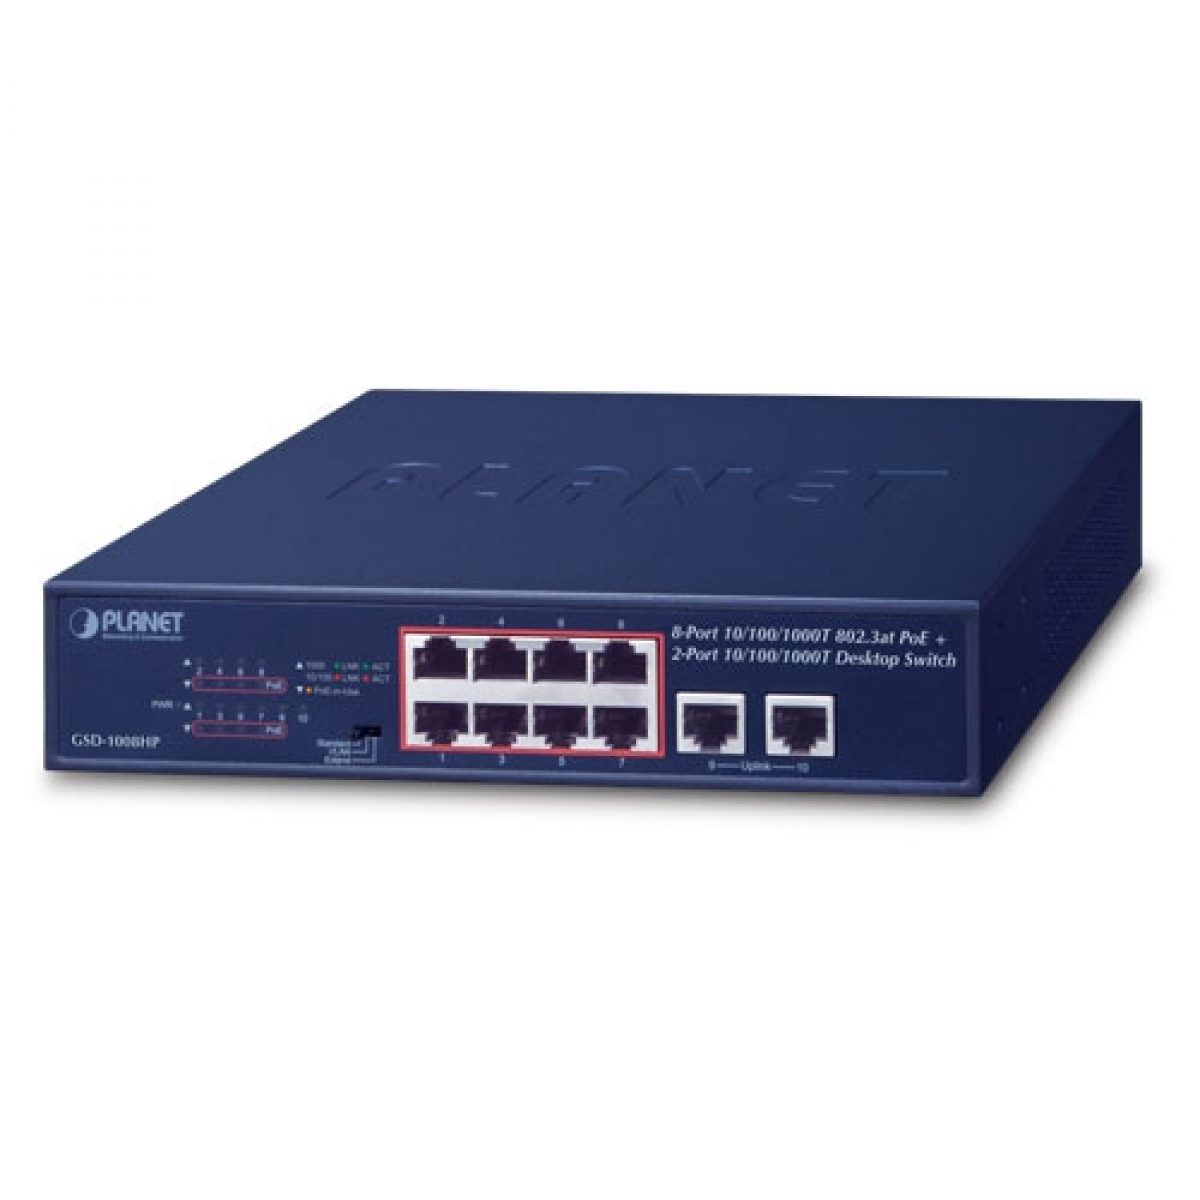 Binardat 8 Port Gigabit PoE Din Rail Industrial Ethernet Switch, 8 PoE  IEEE802.3af/at, 16Gbps Switching Capacity, with One 96W PoE Power Supply